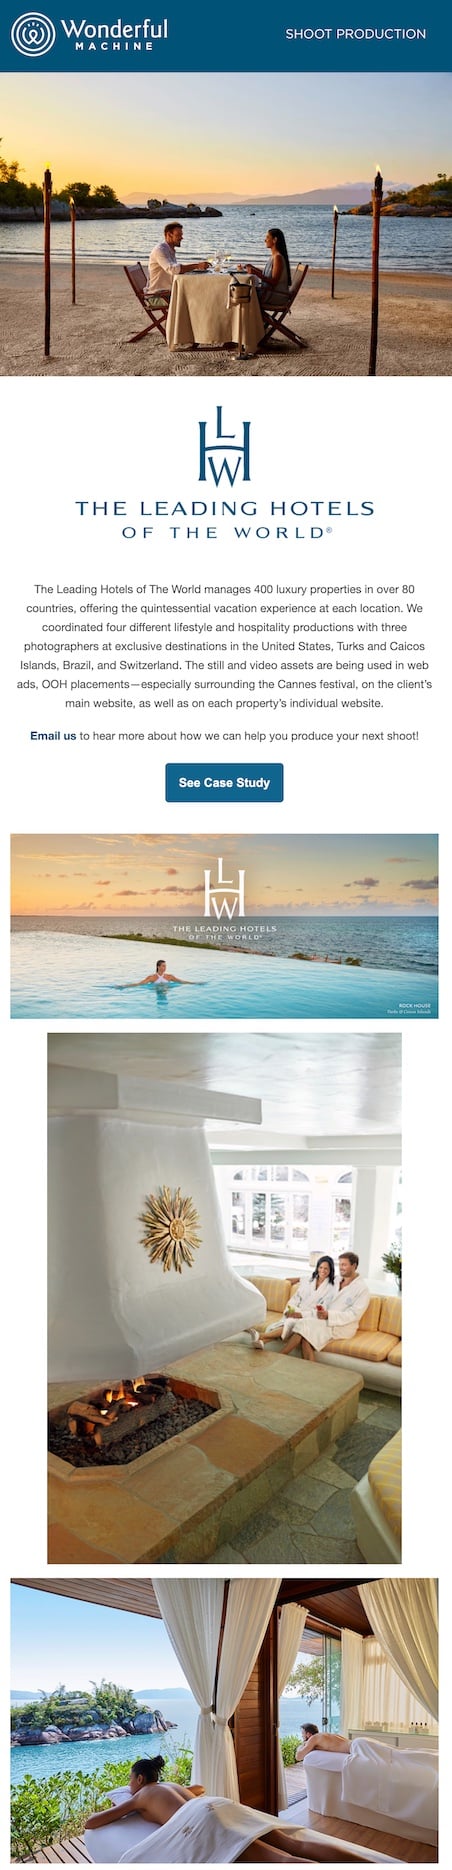 Shoot Production leading hotels of the world emailer